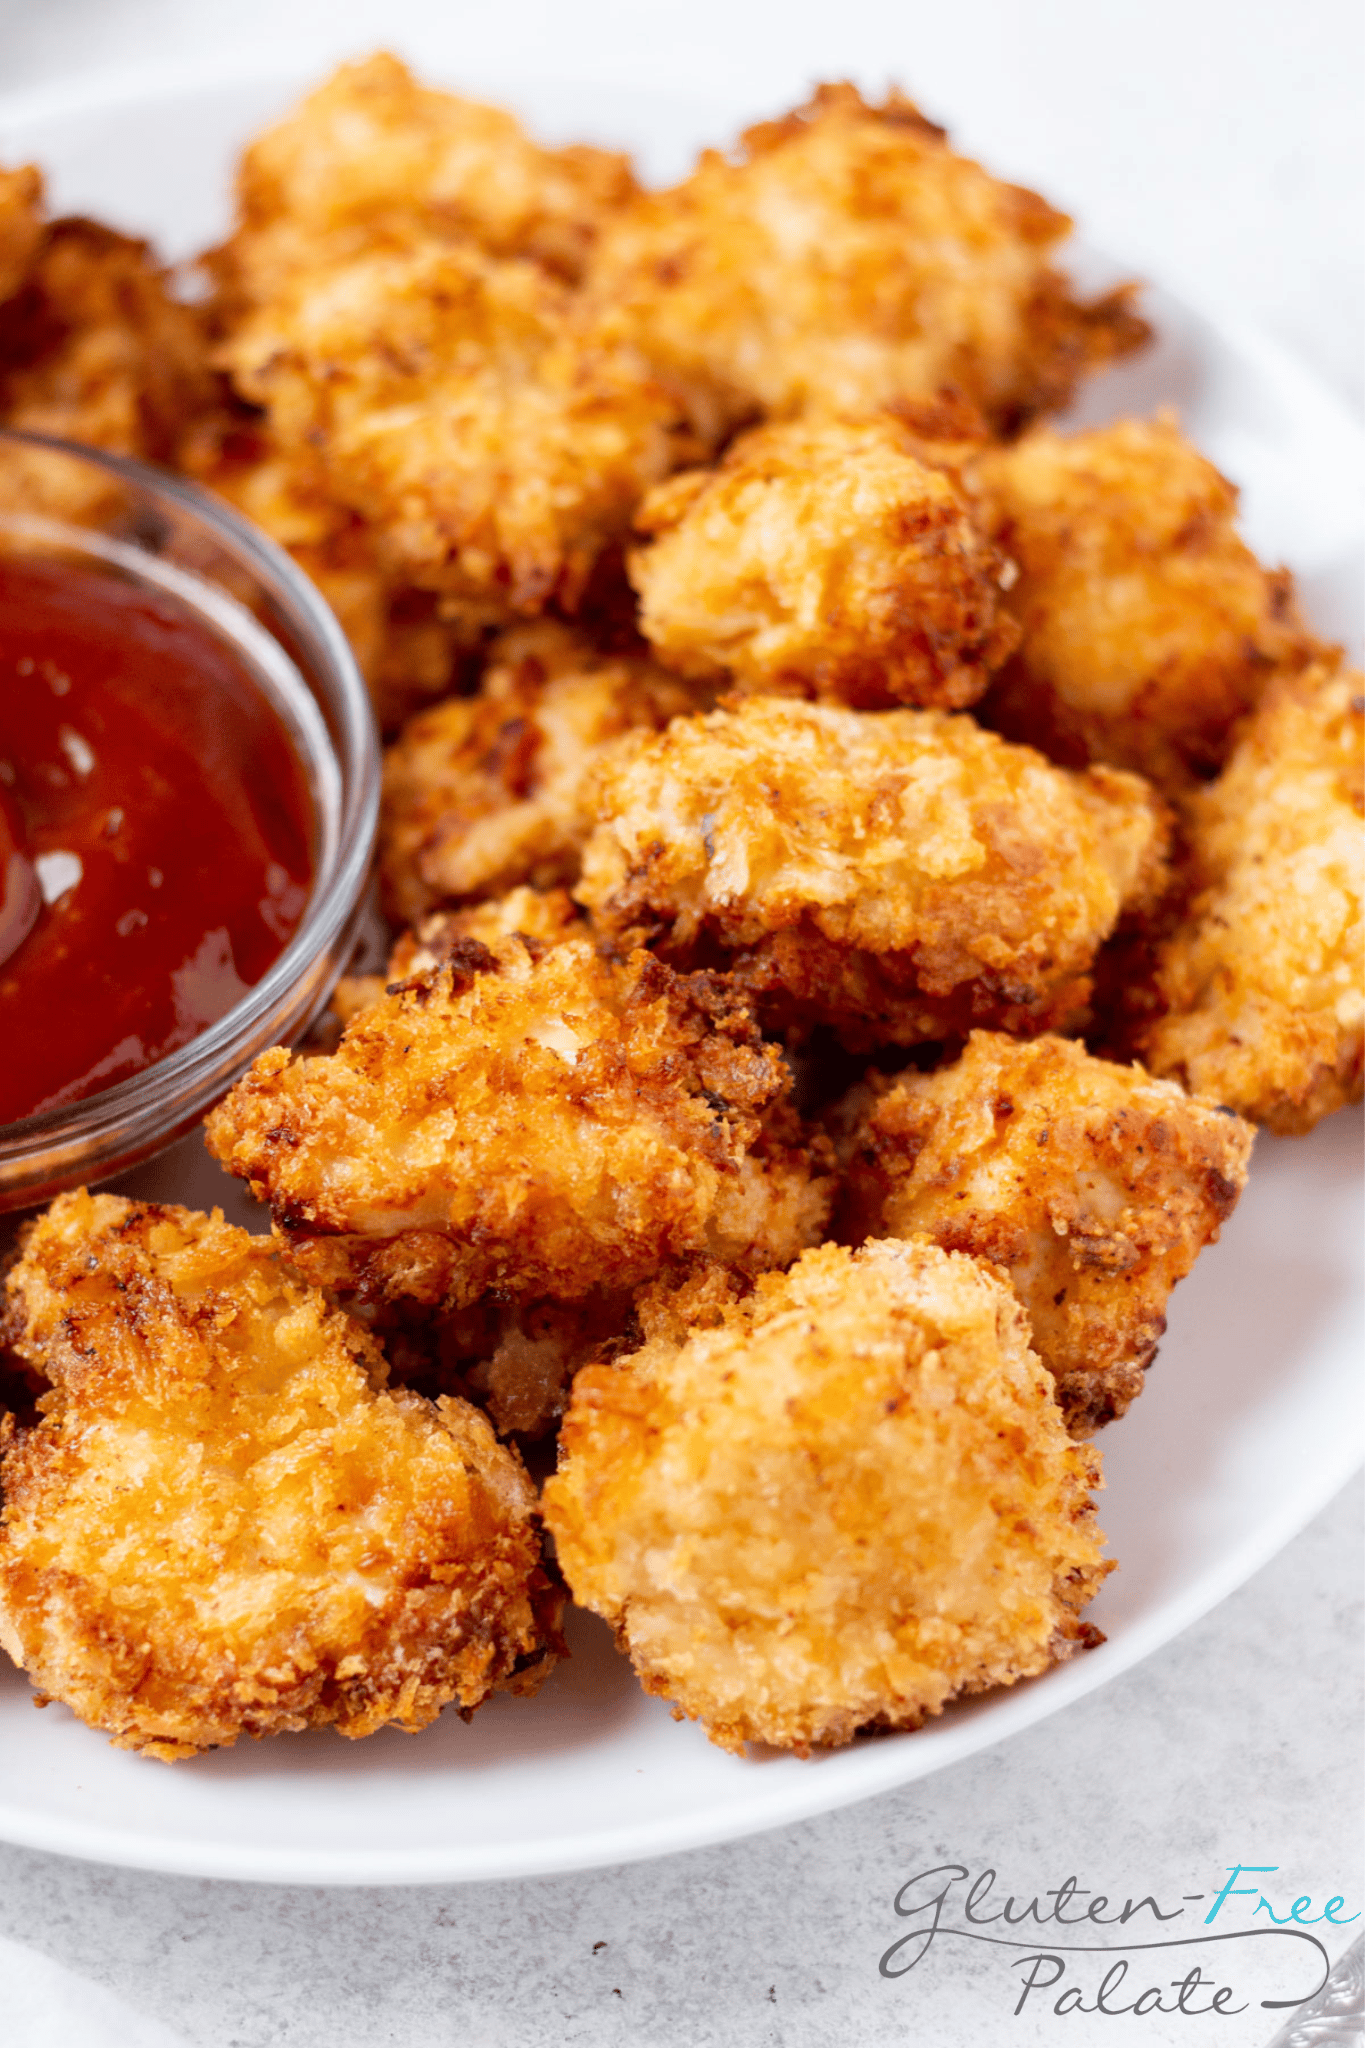 closeup view of a plate of baked gluten-free chicken nuggets